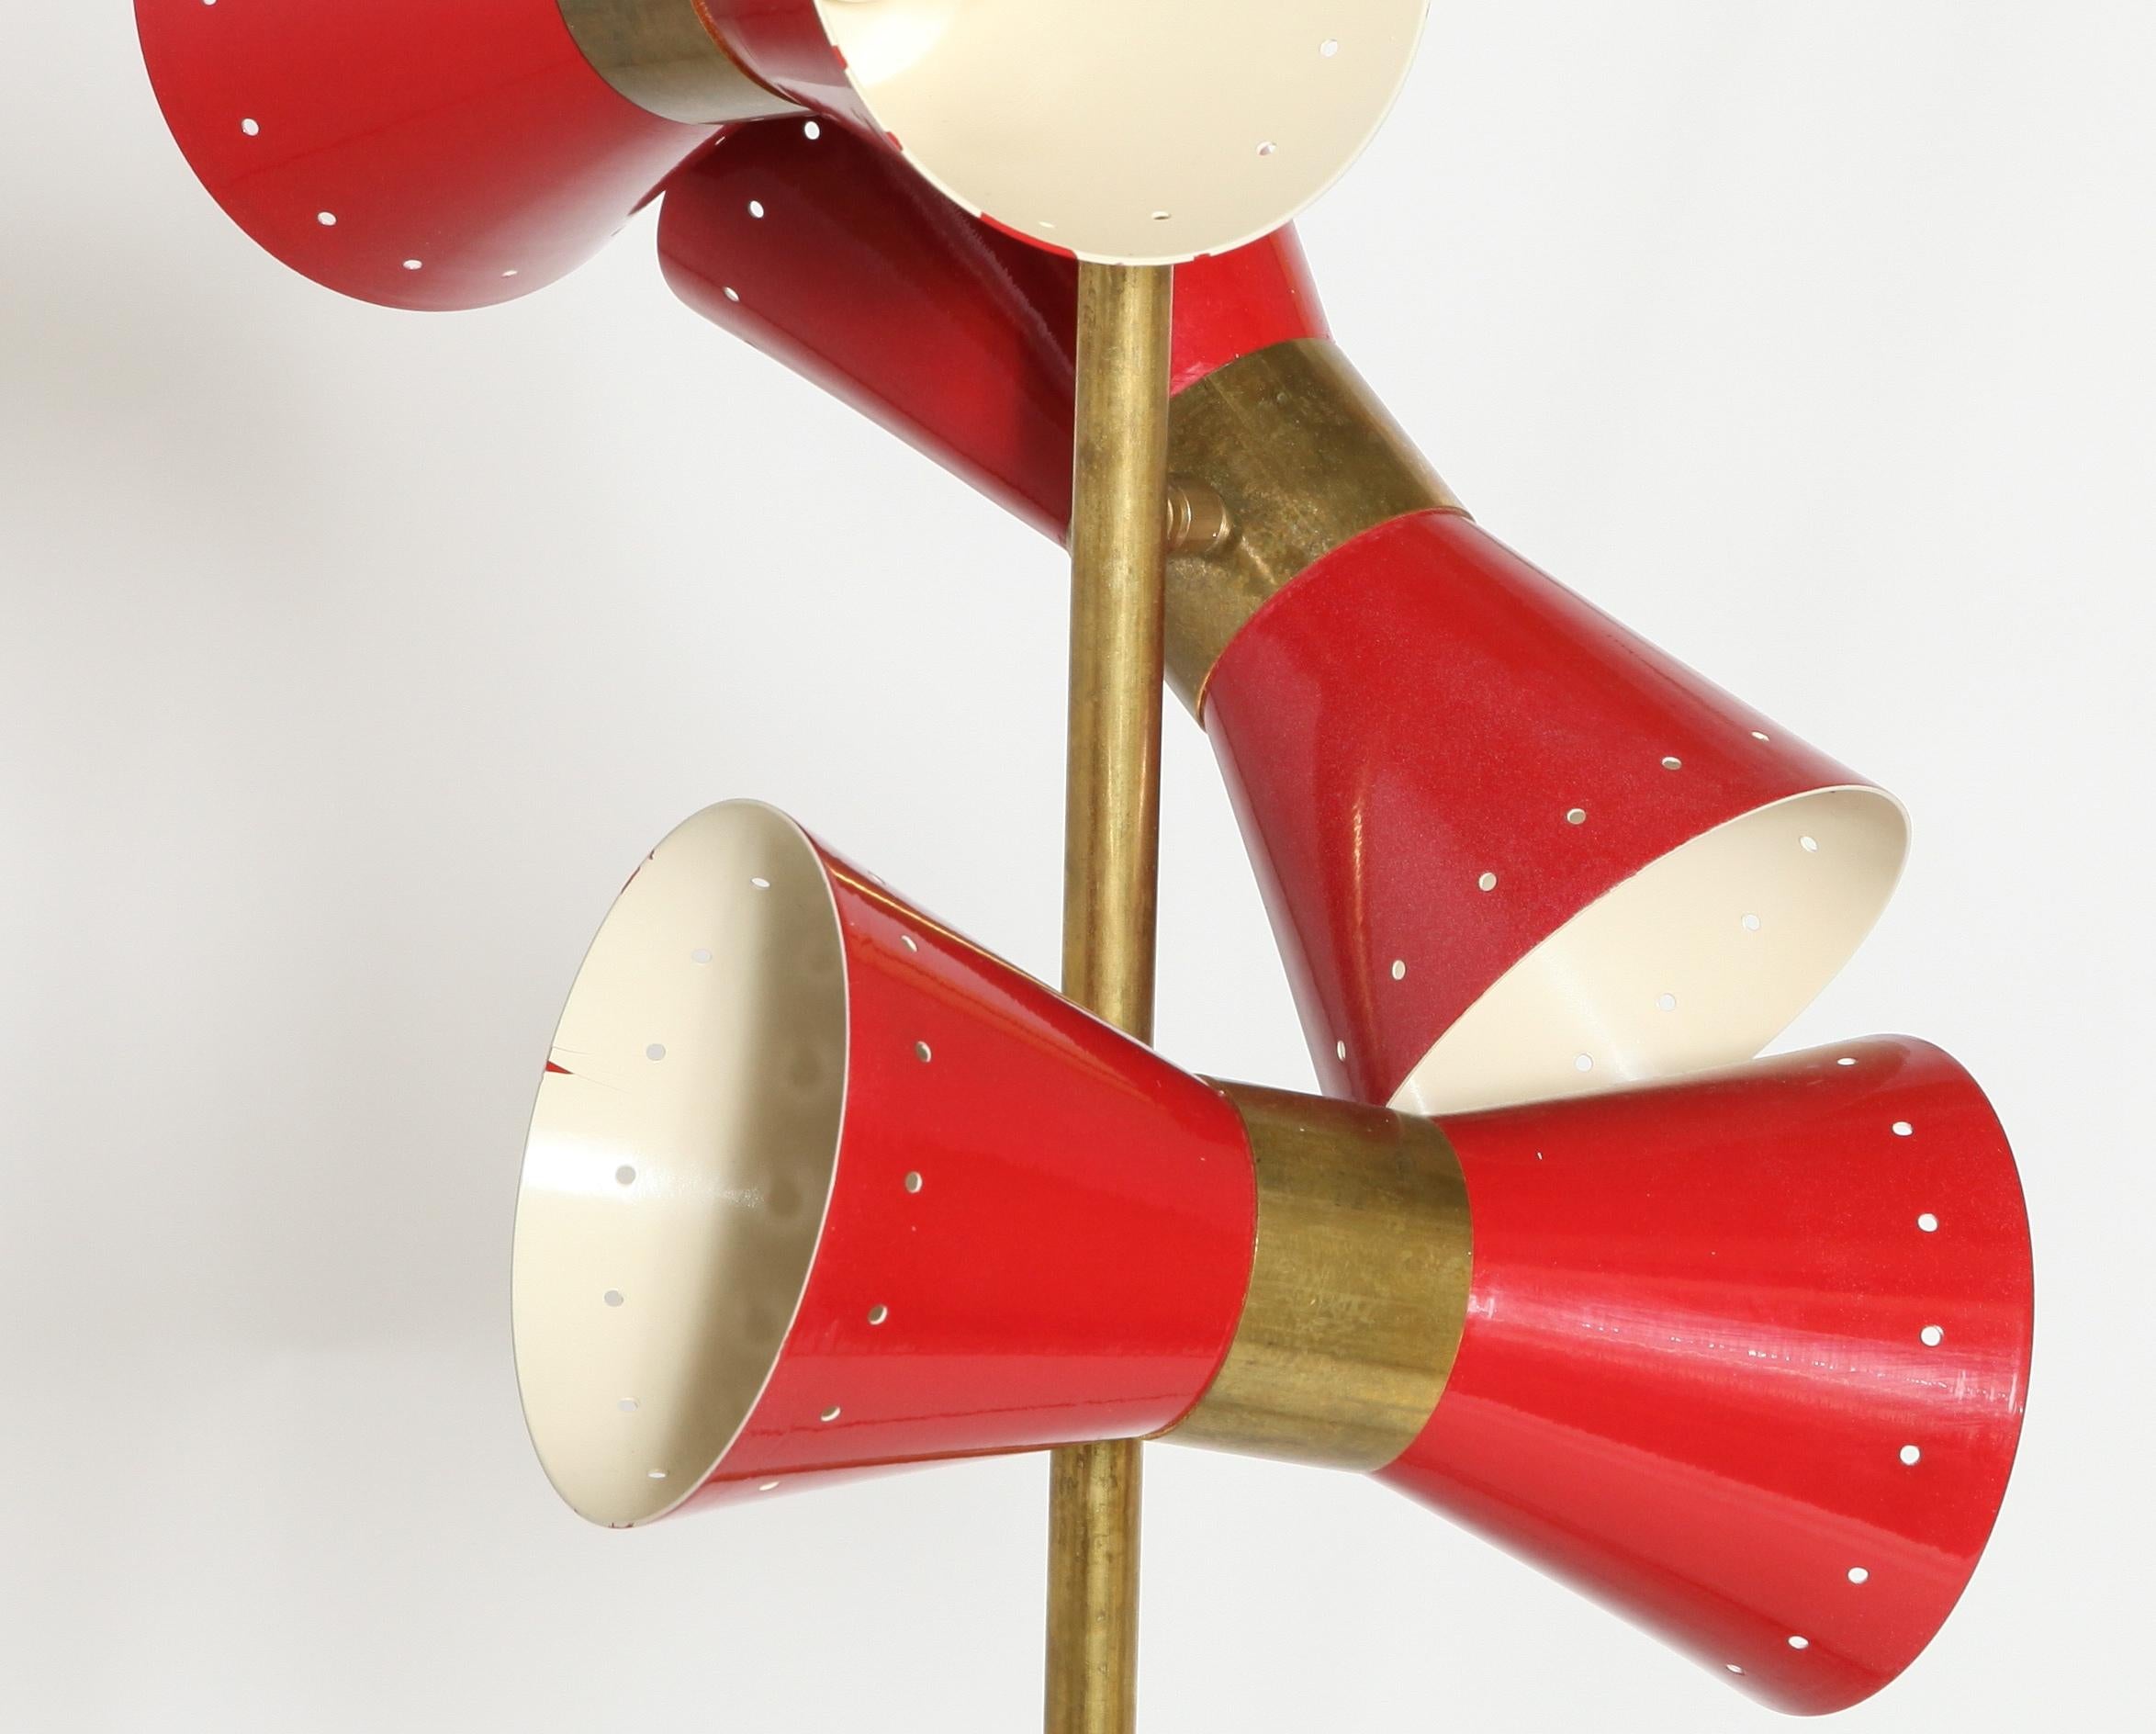 Arteluce style Italian modern floor lamp with two independently adjustable stems and with white and red enameled metal conical shades. The piece has a marble base. In great vintage condition with age-appropriate wear and use.